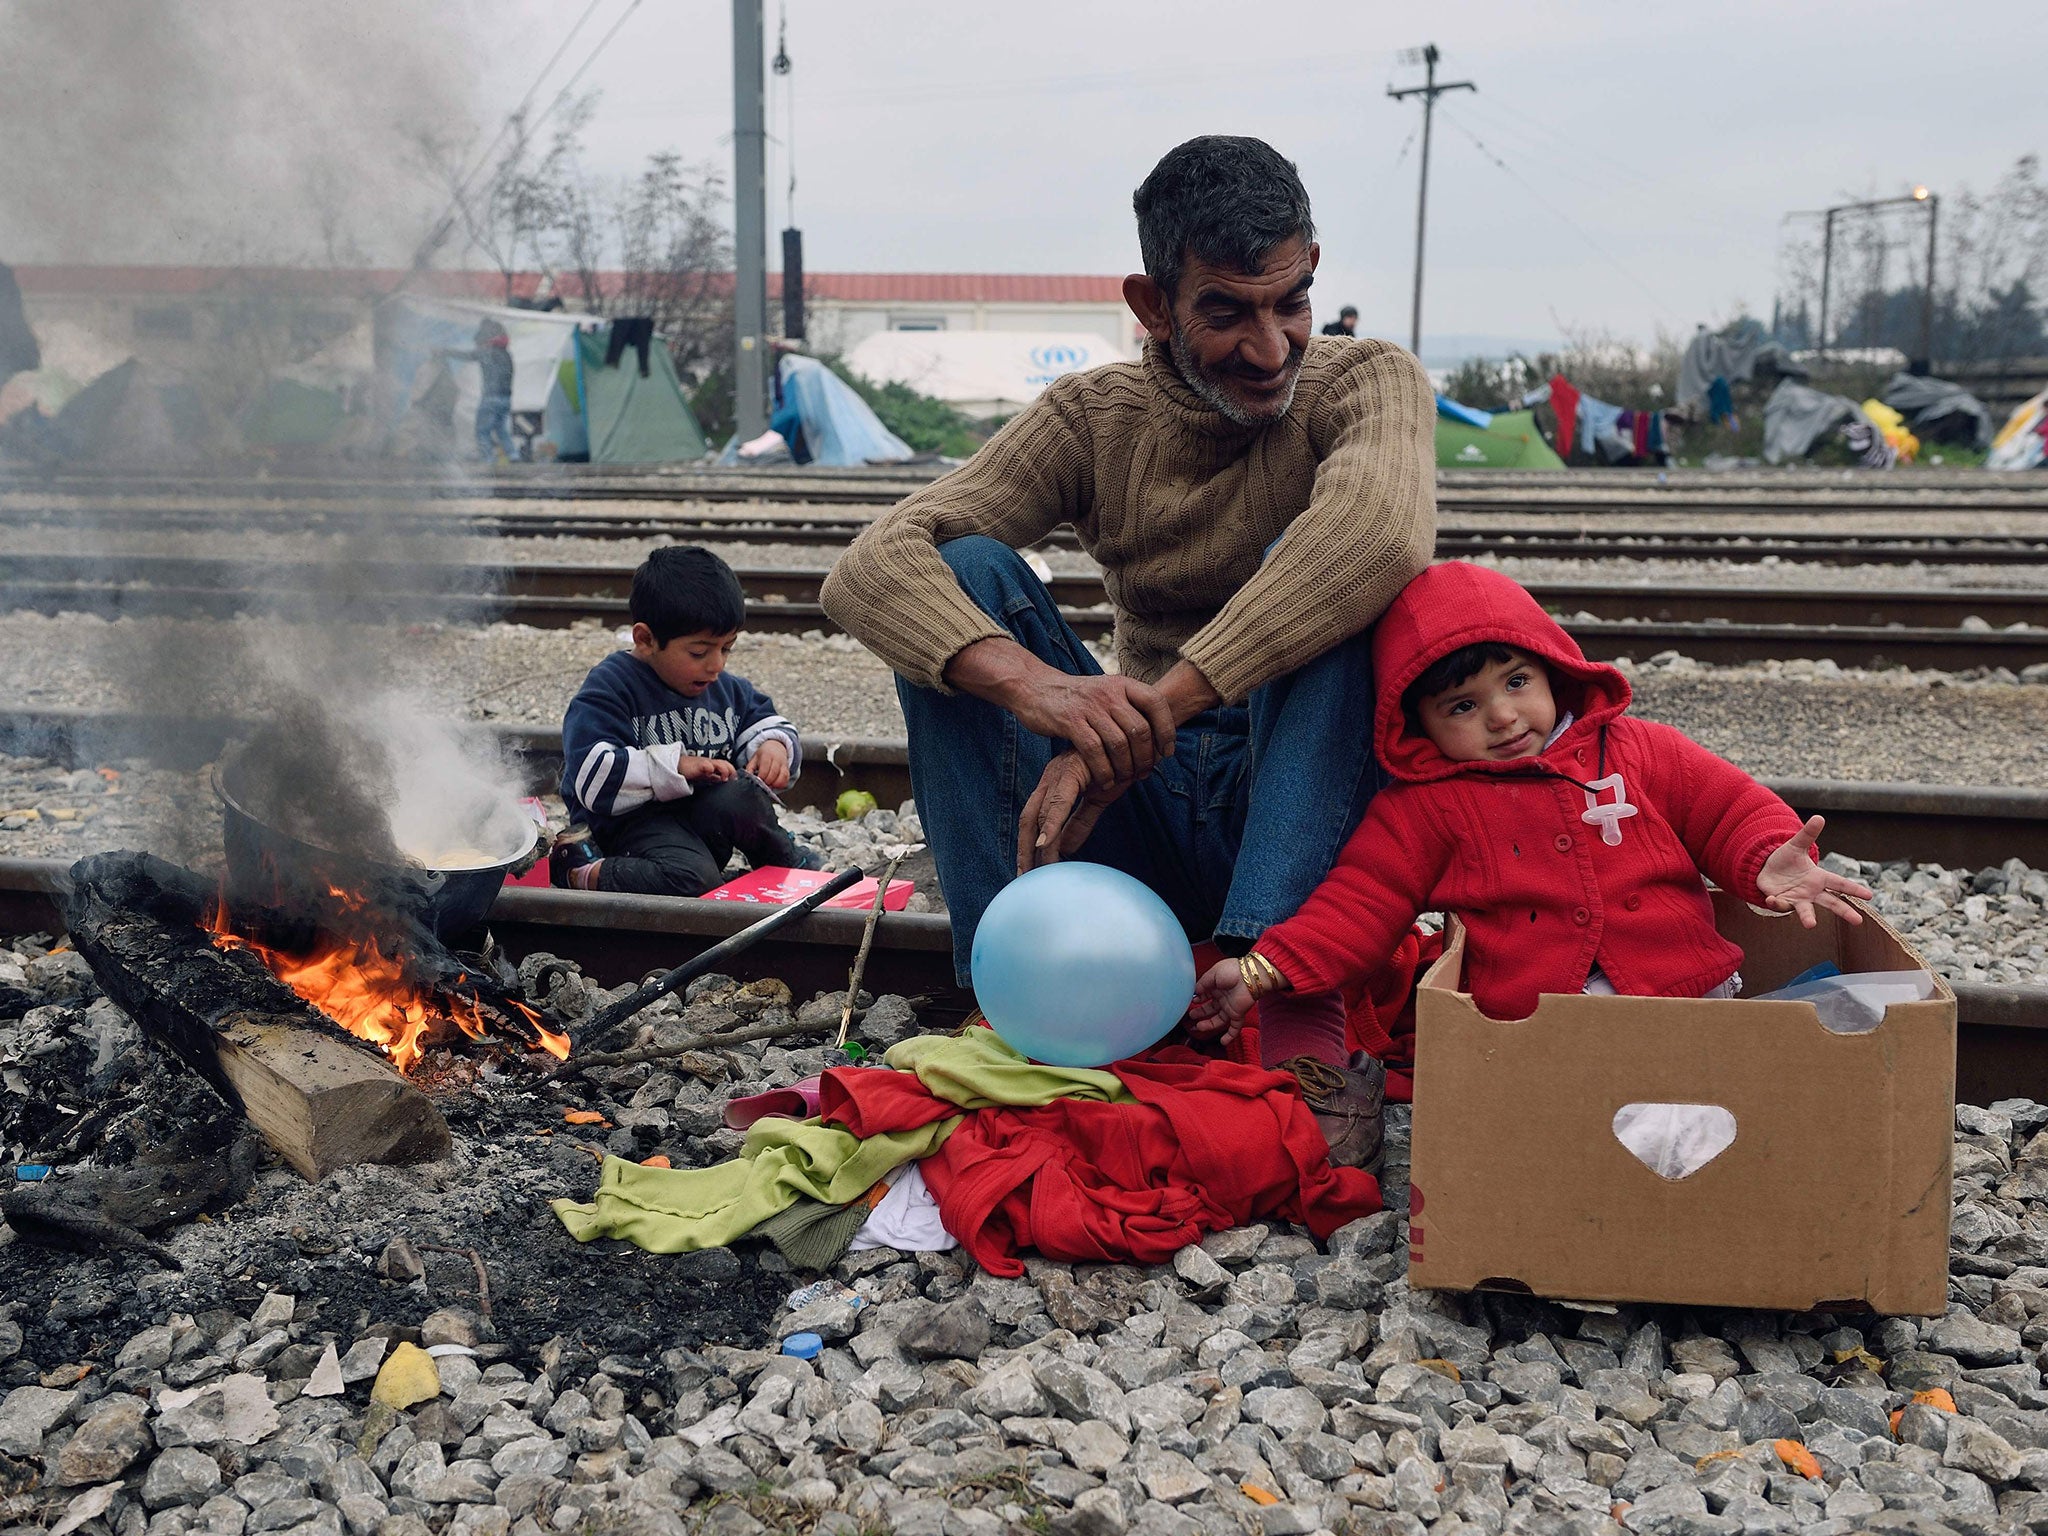 Refugees at a makeshift camp near the Greek village of Idomeni; thousands are stranded at the Balkan border